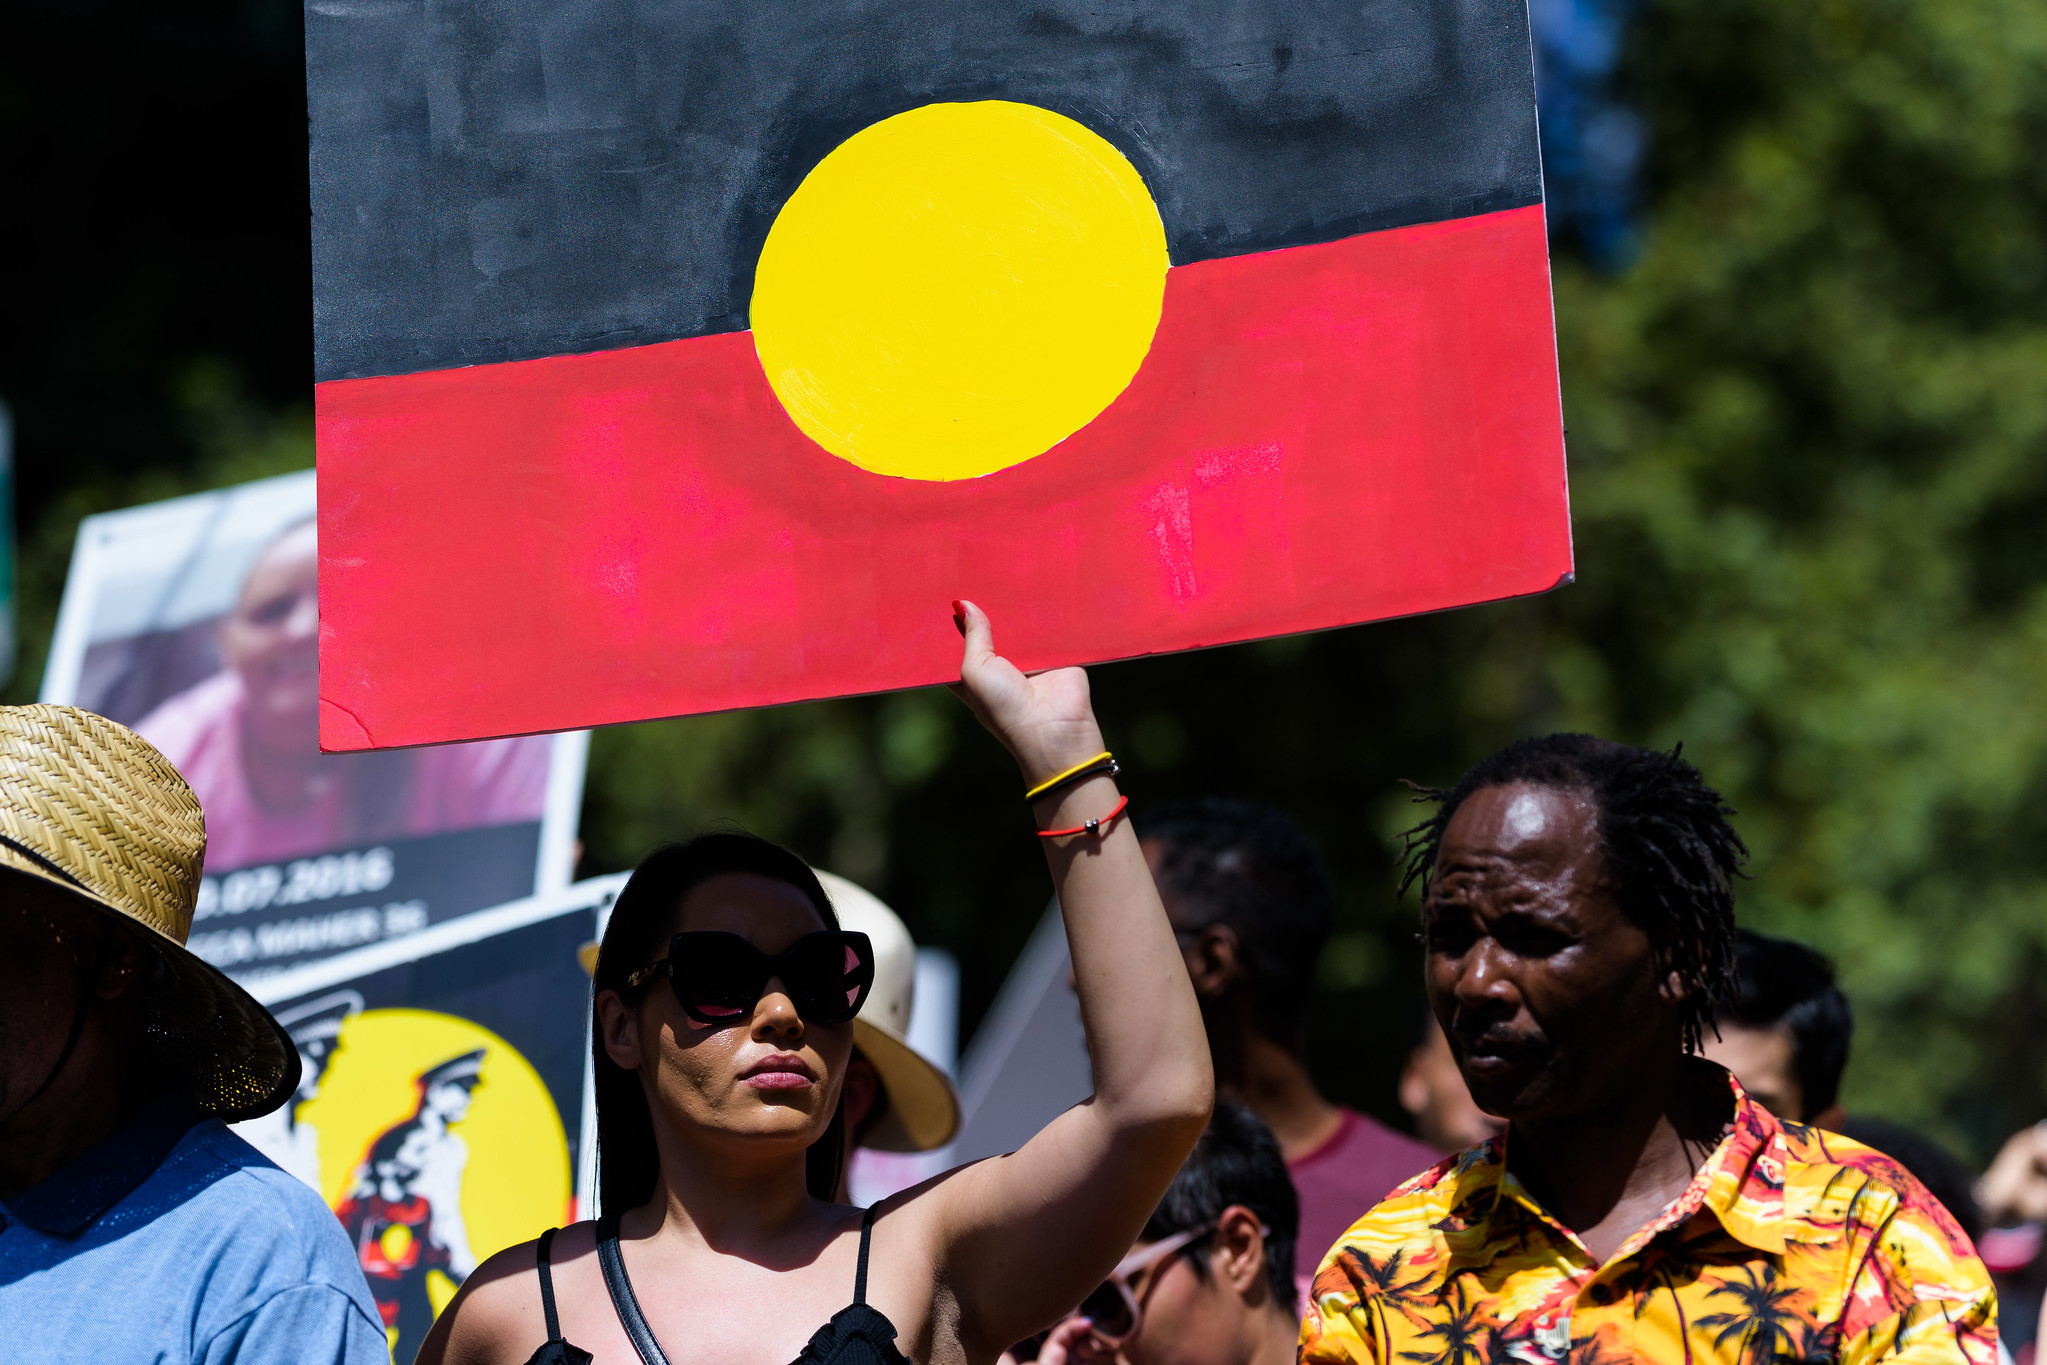 Invasion day protest Image julian meehan Flickr